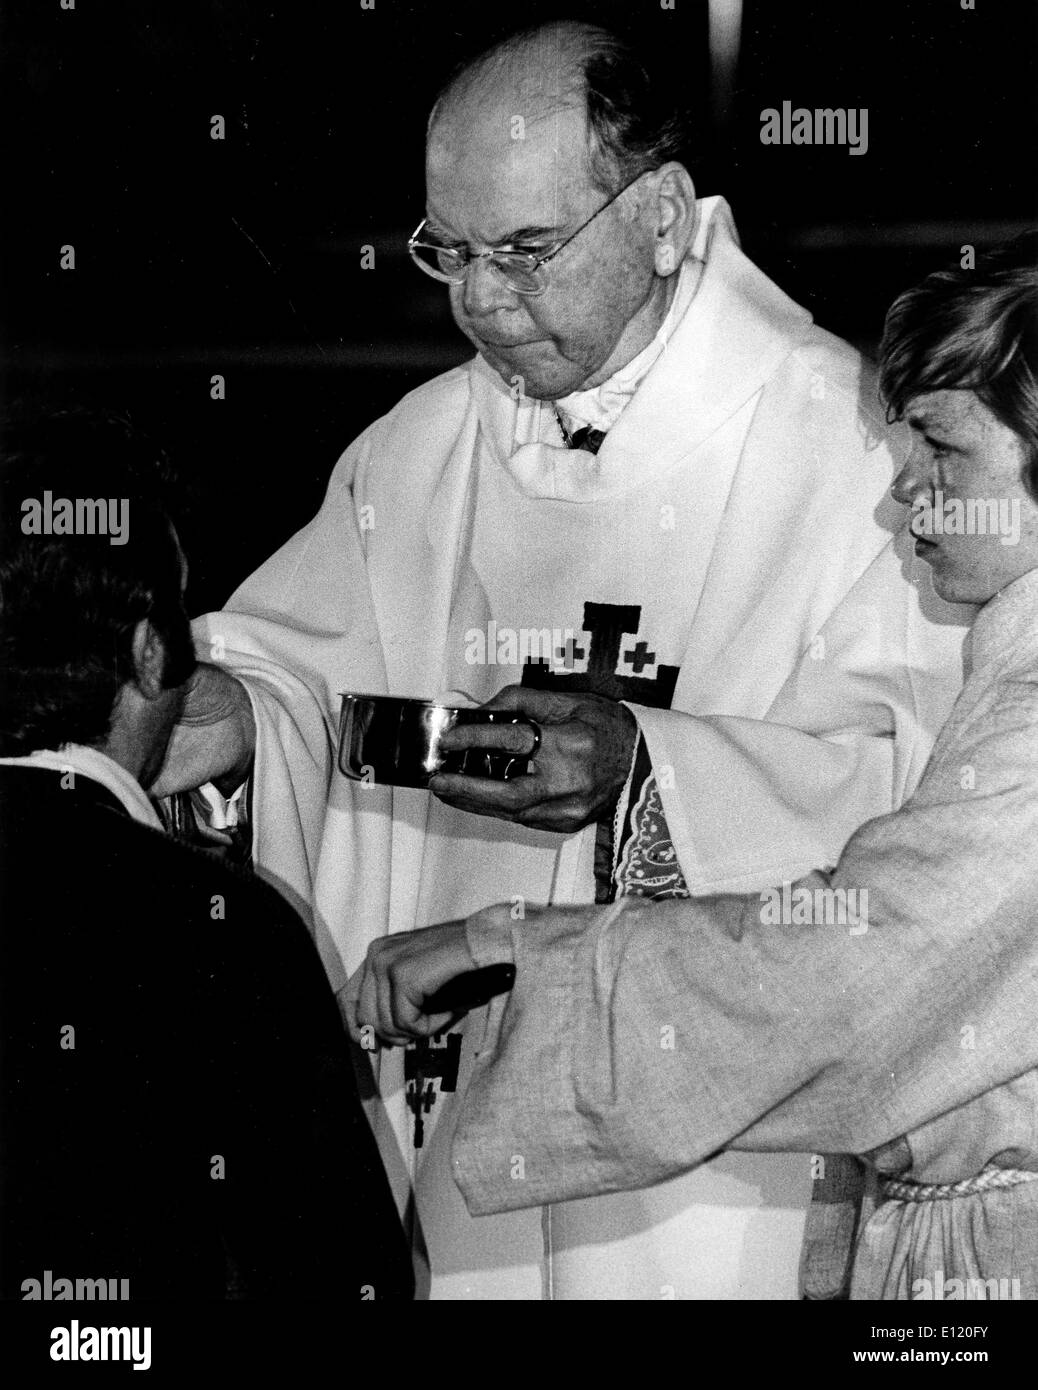 Cardinal TERENCE COOKE giving communion in a special service at St. Patrick's cathedral, after an assassination attempt on Pope Stock Photo